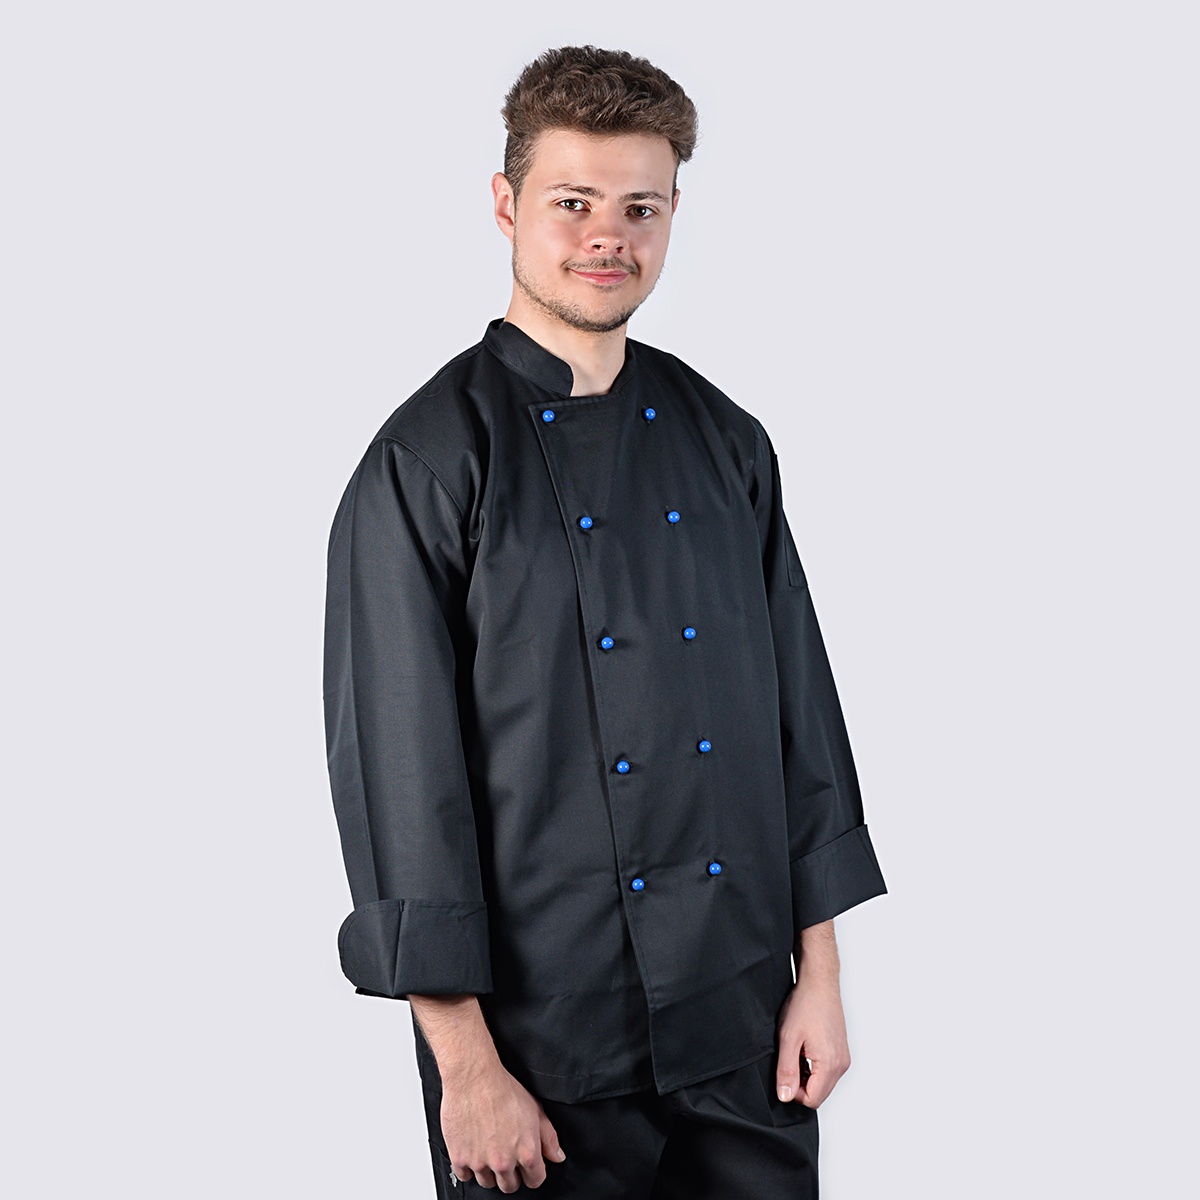 Black Jackets Long Sleeves with Blue Coloured Button